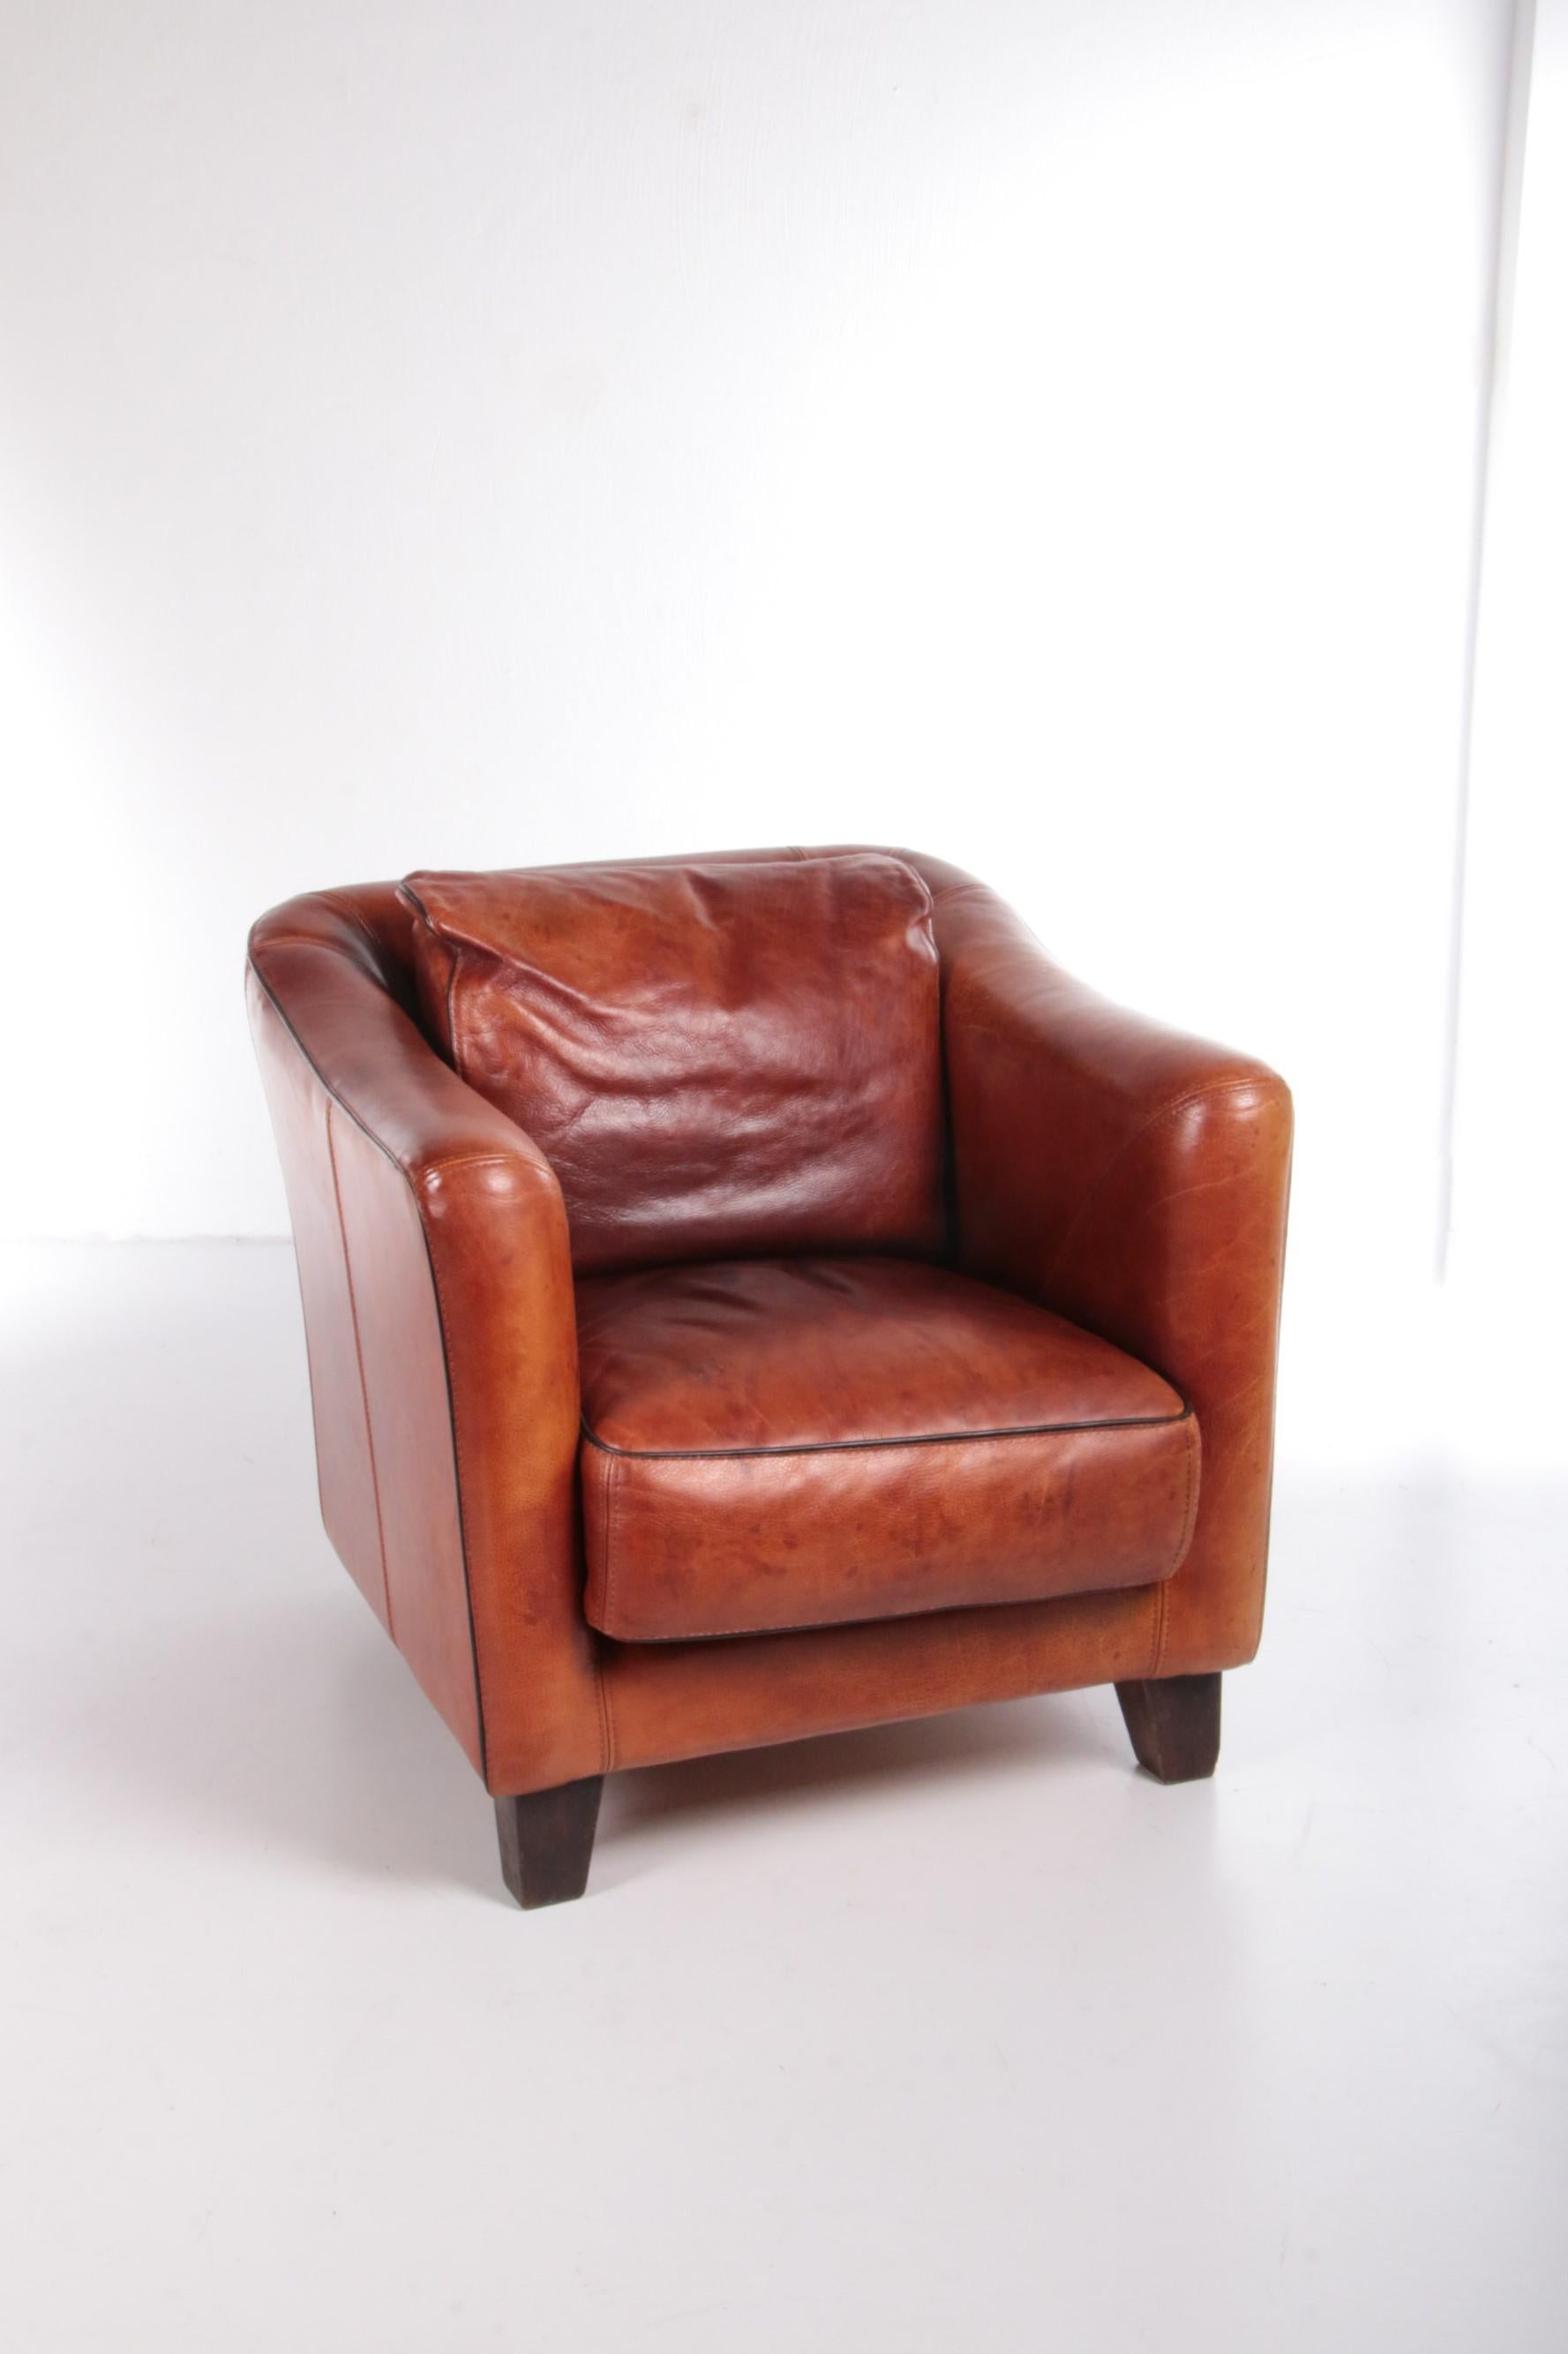 Italian bullskin relax armchair brand Baxter

This is a nice heavy quality leather chair.
BAXTER Bergere armchair in super thick bull leather.

“The Rolls Royce of armchairs!”

Made in Italy!
Made of the thickest bull leather and